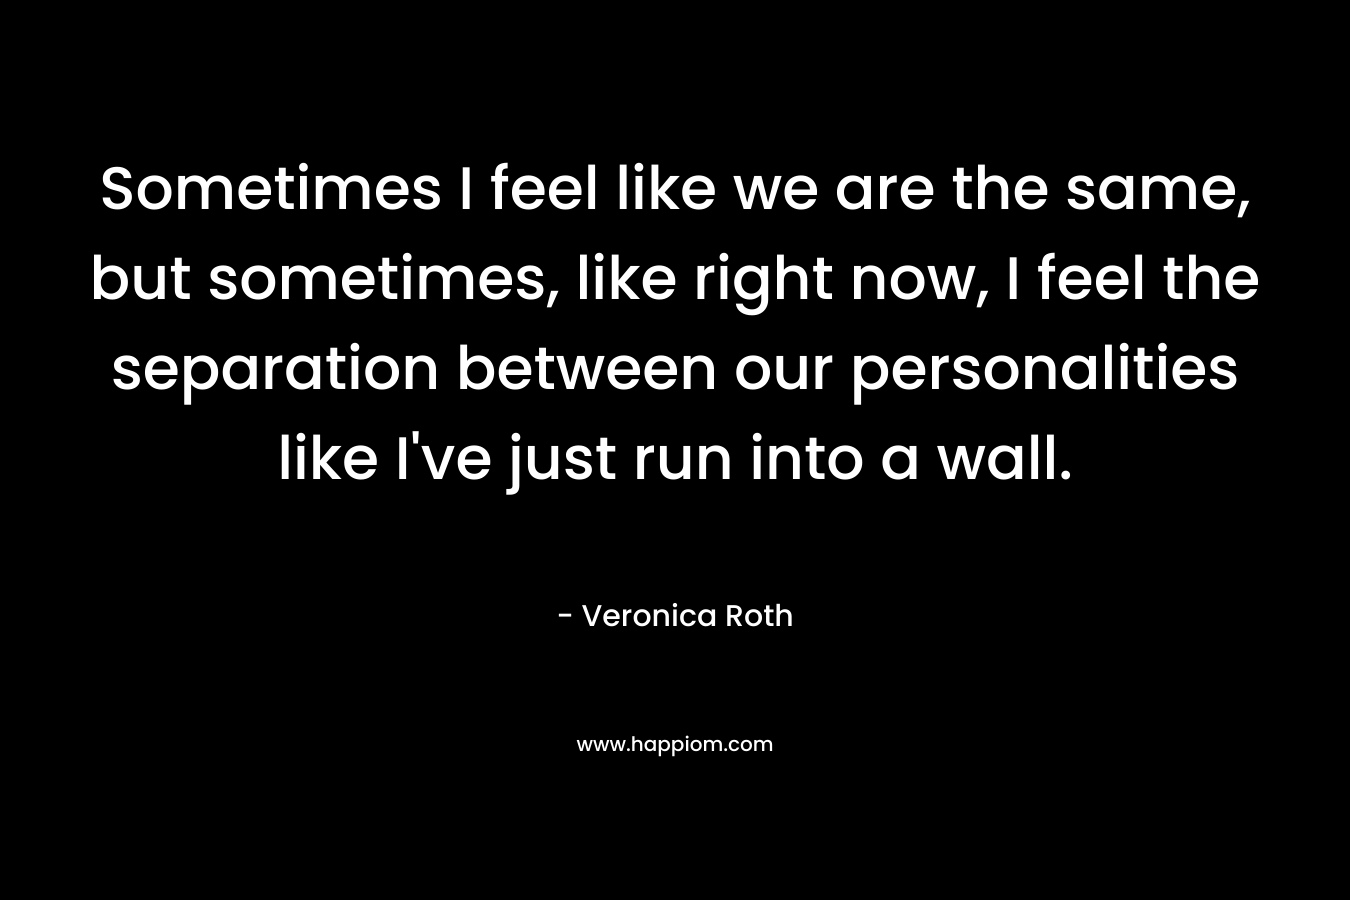 Sometimes I feel like we are the same, but sometimes, like right now, I feel the separation between our personalities like I’ve just run into a wall. – Veronica Roth